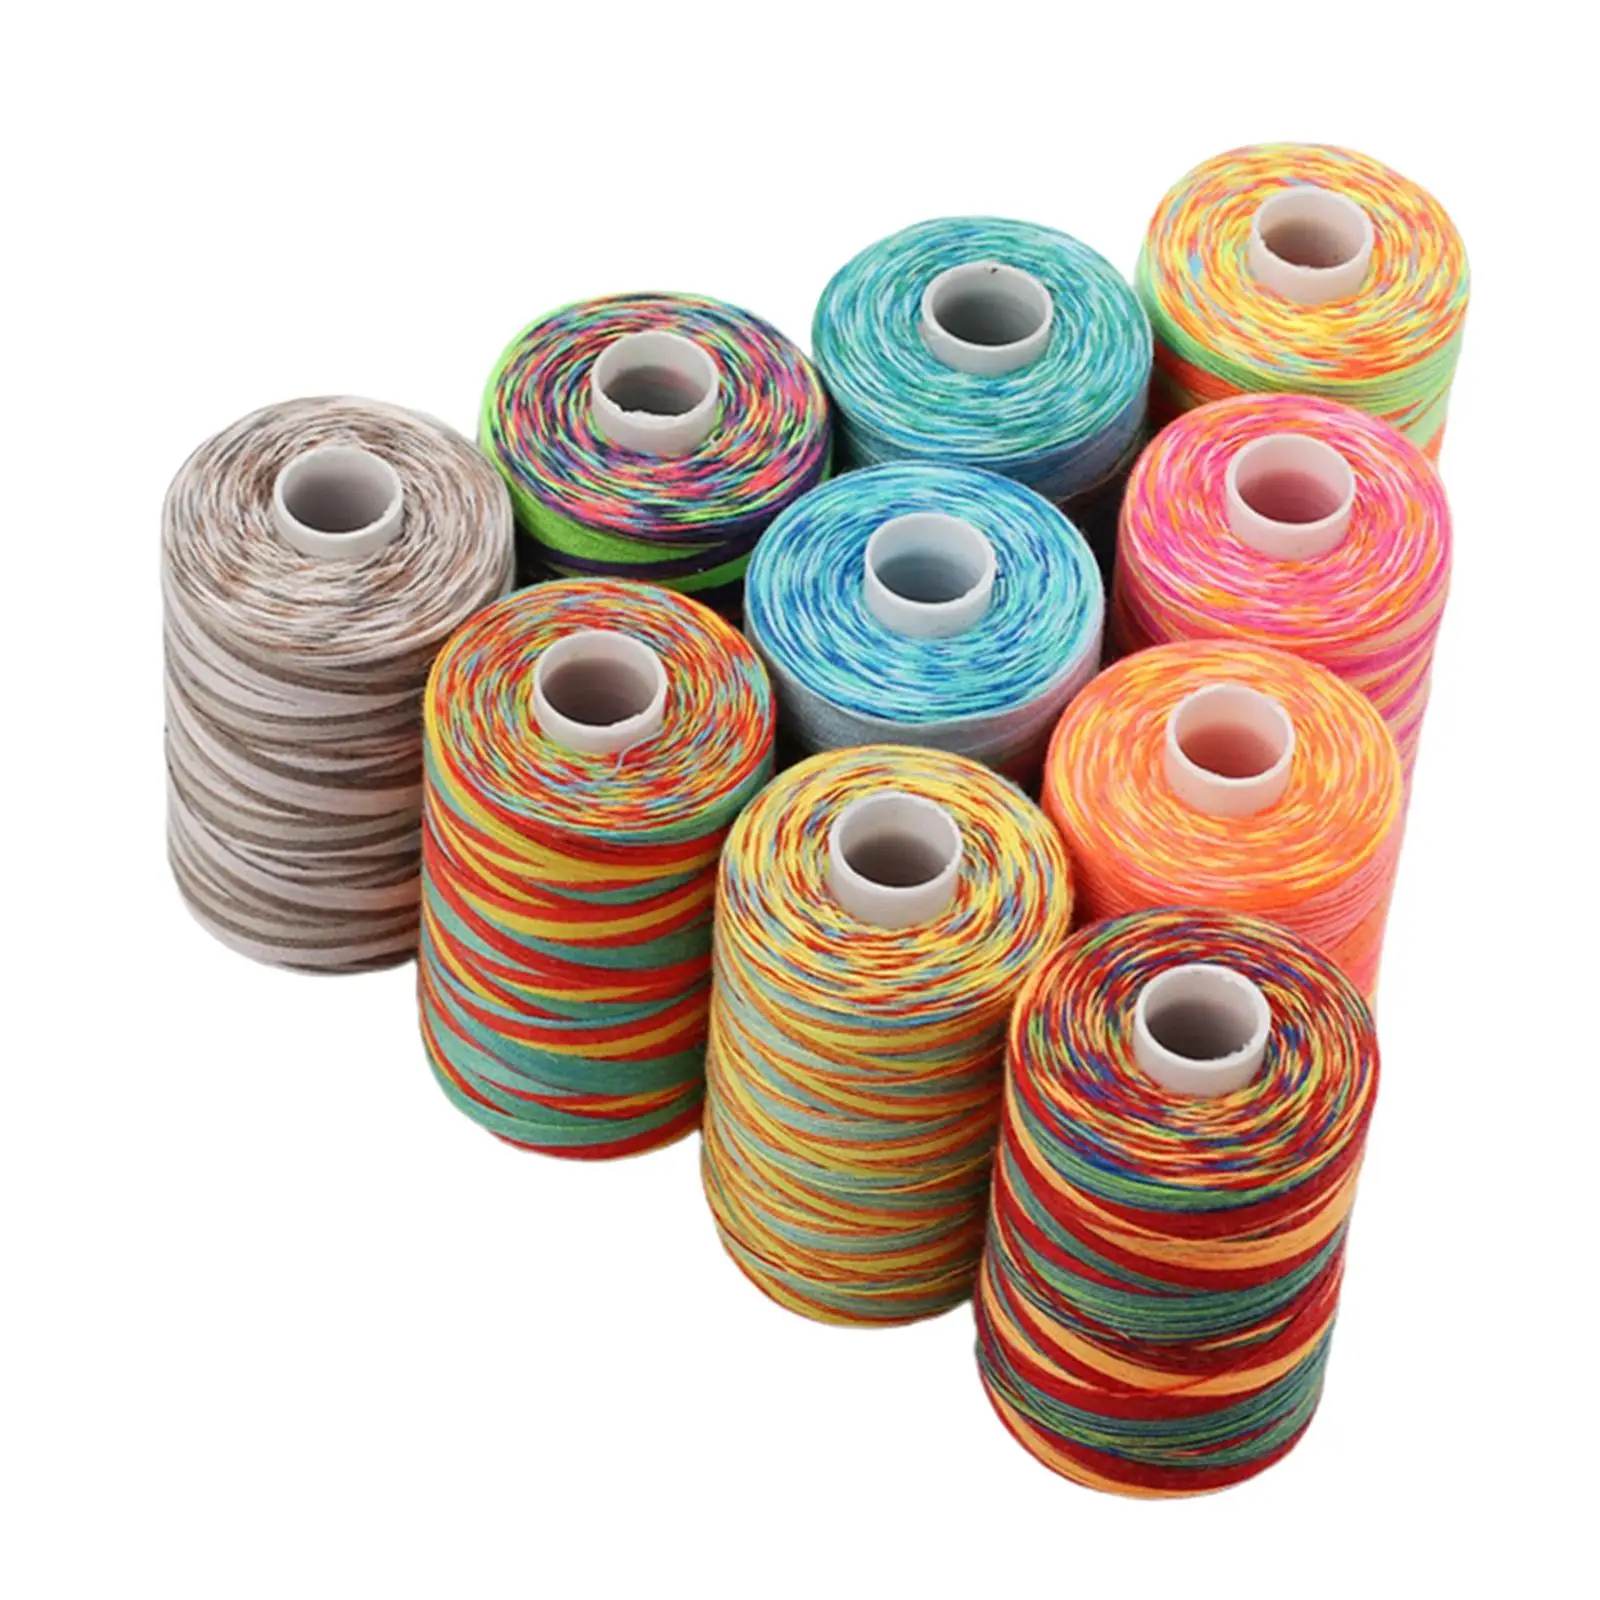 10x High Tenacity Sewing Thread Embroidery Machine Thread Thread Kit Polyester Sewing Thread for Crocheting Quilting Patchwork